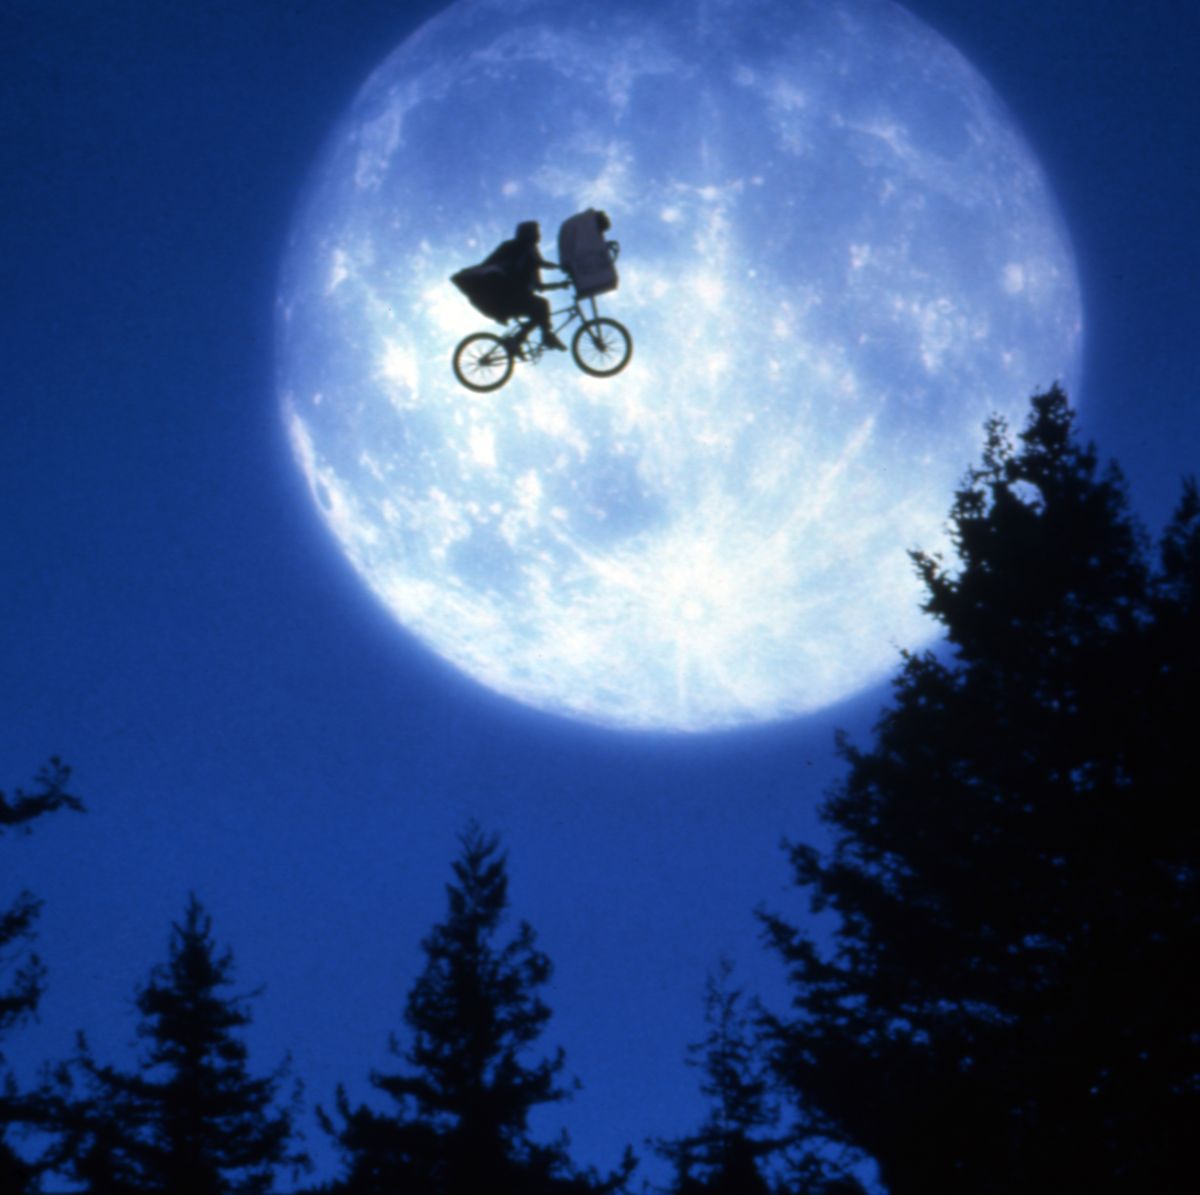 E.T. the extra-terrestrial is now up for grabs for $3 mn - The